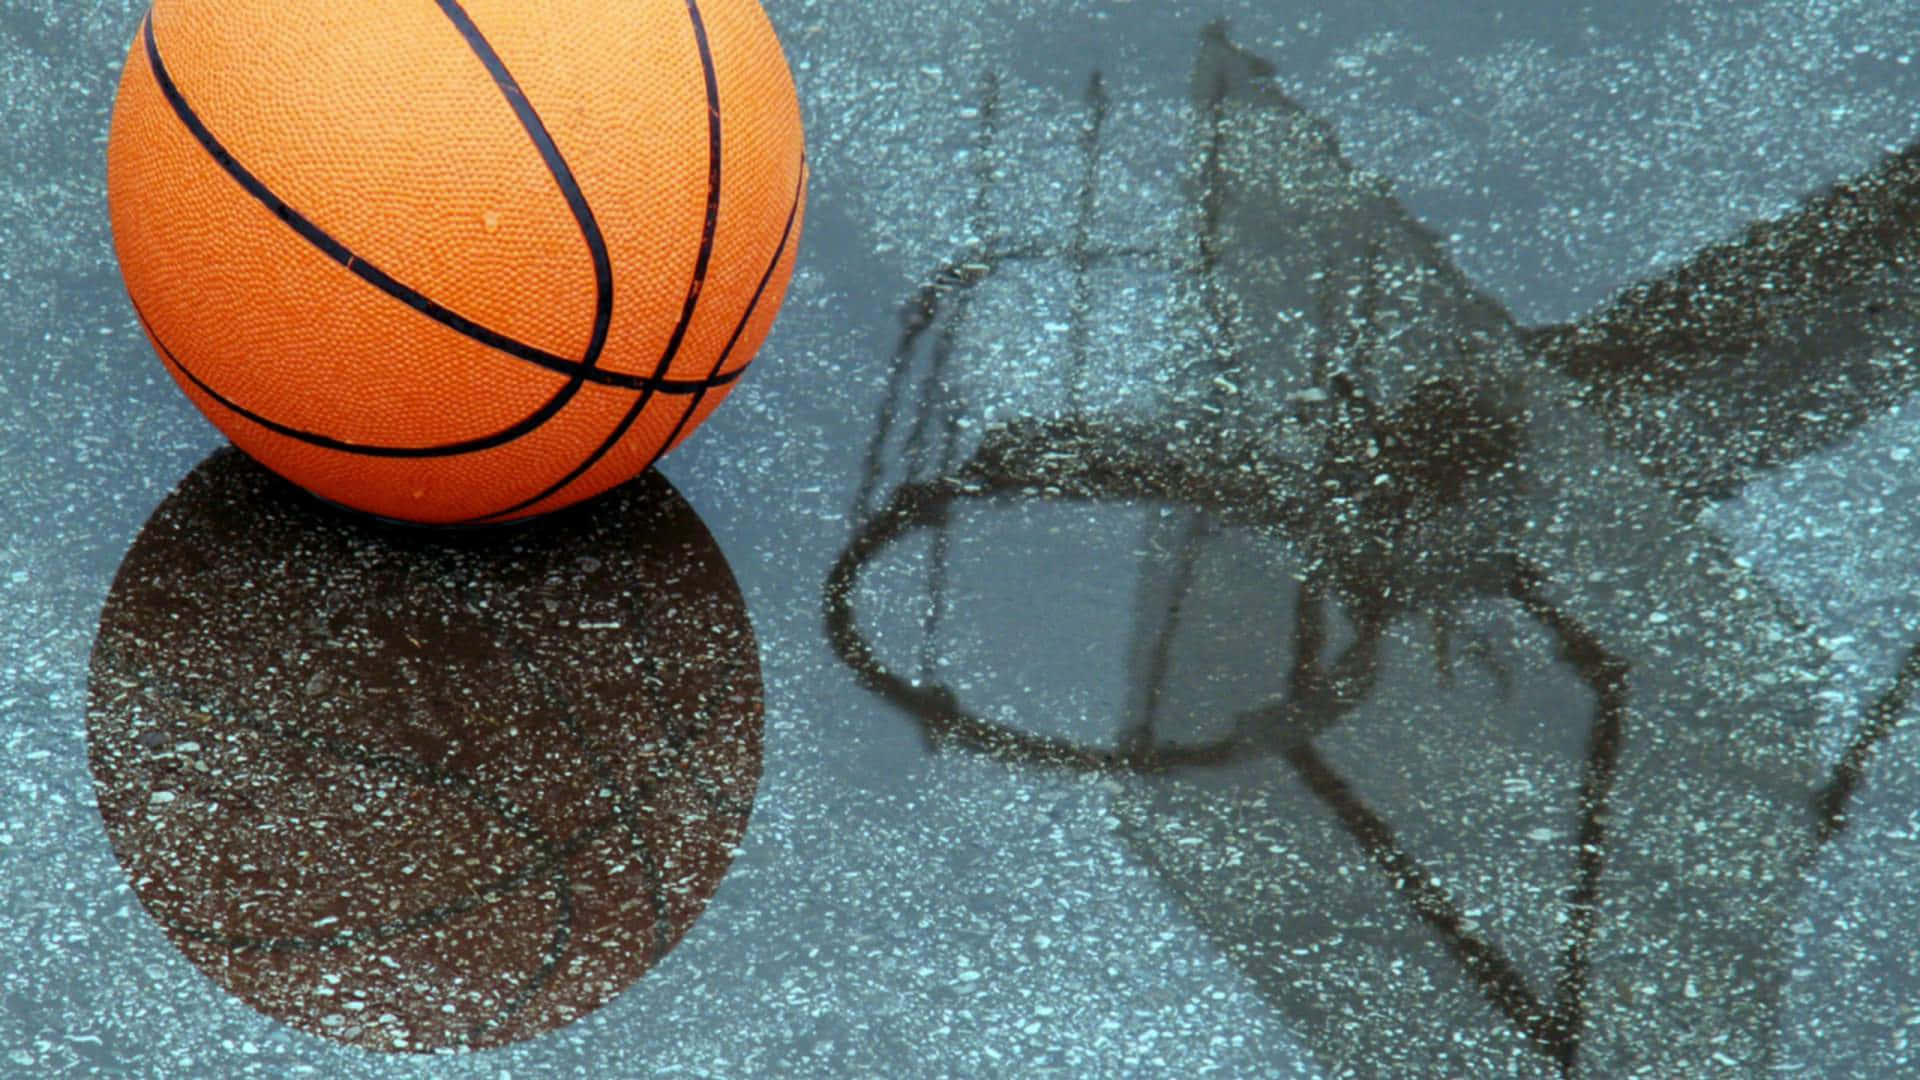 Get Ready to Dribble and Shoot With Cool Basketball